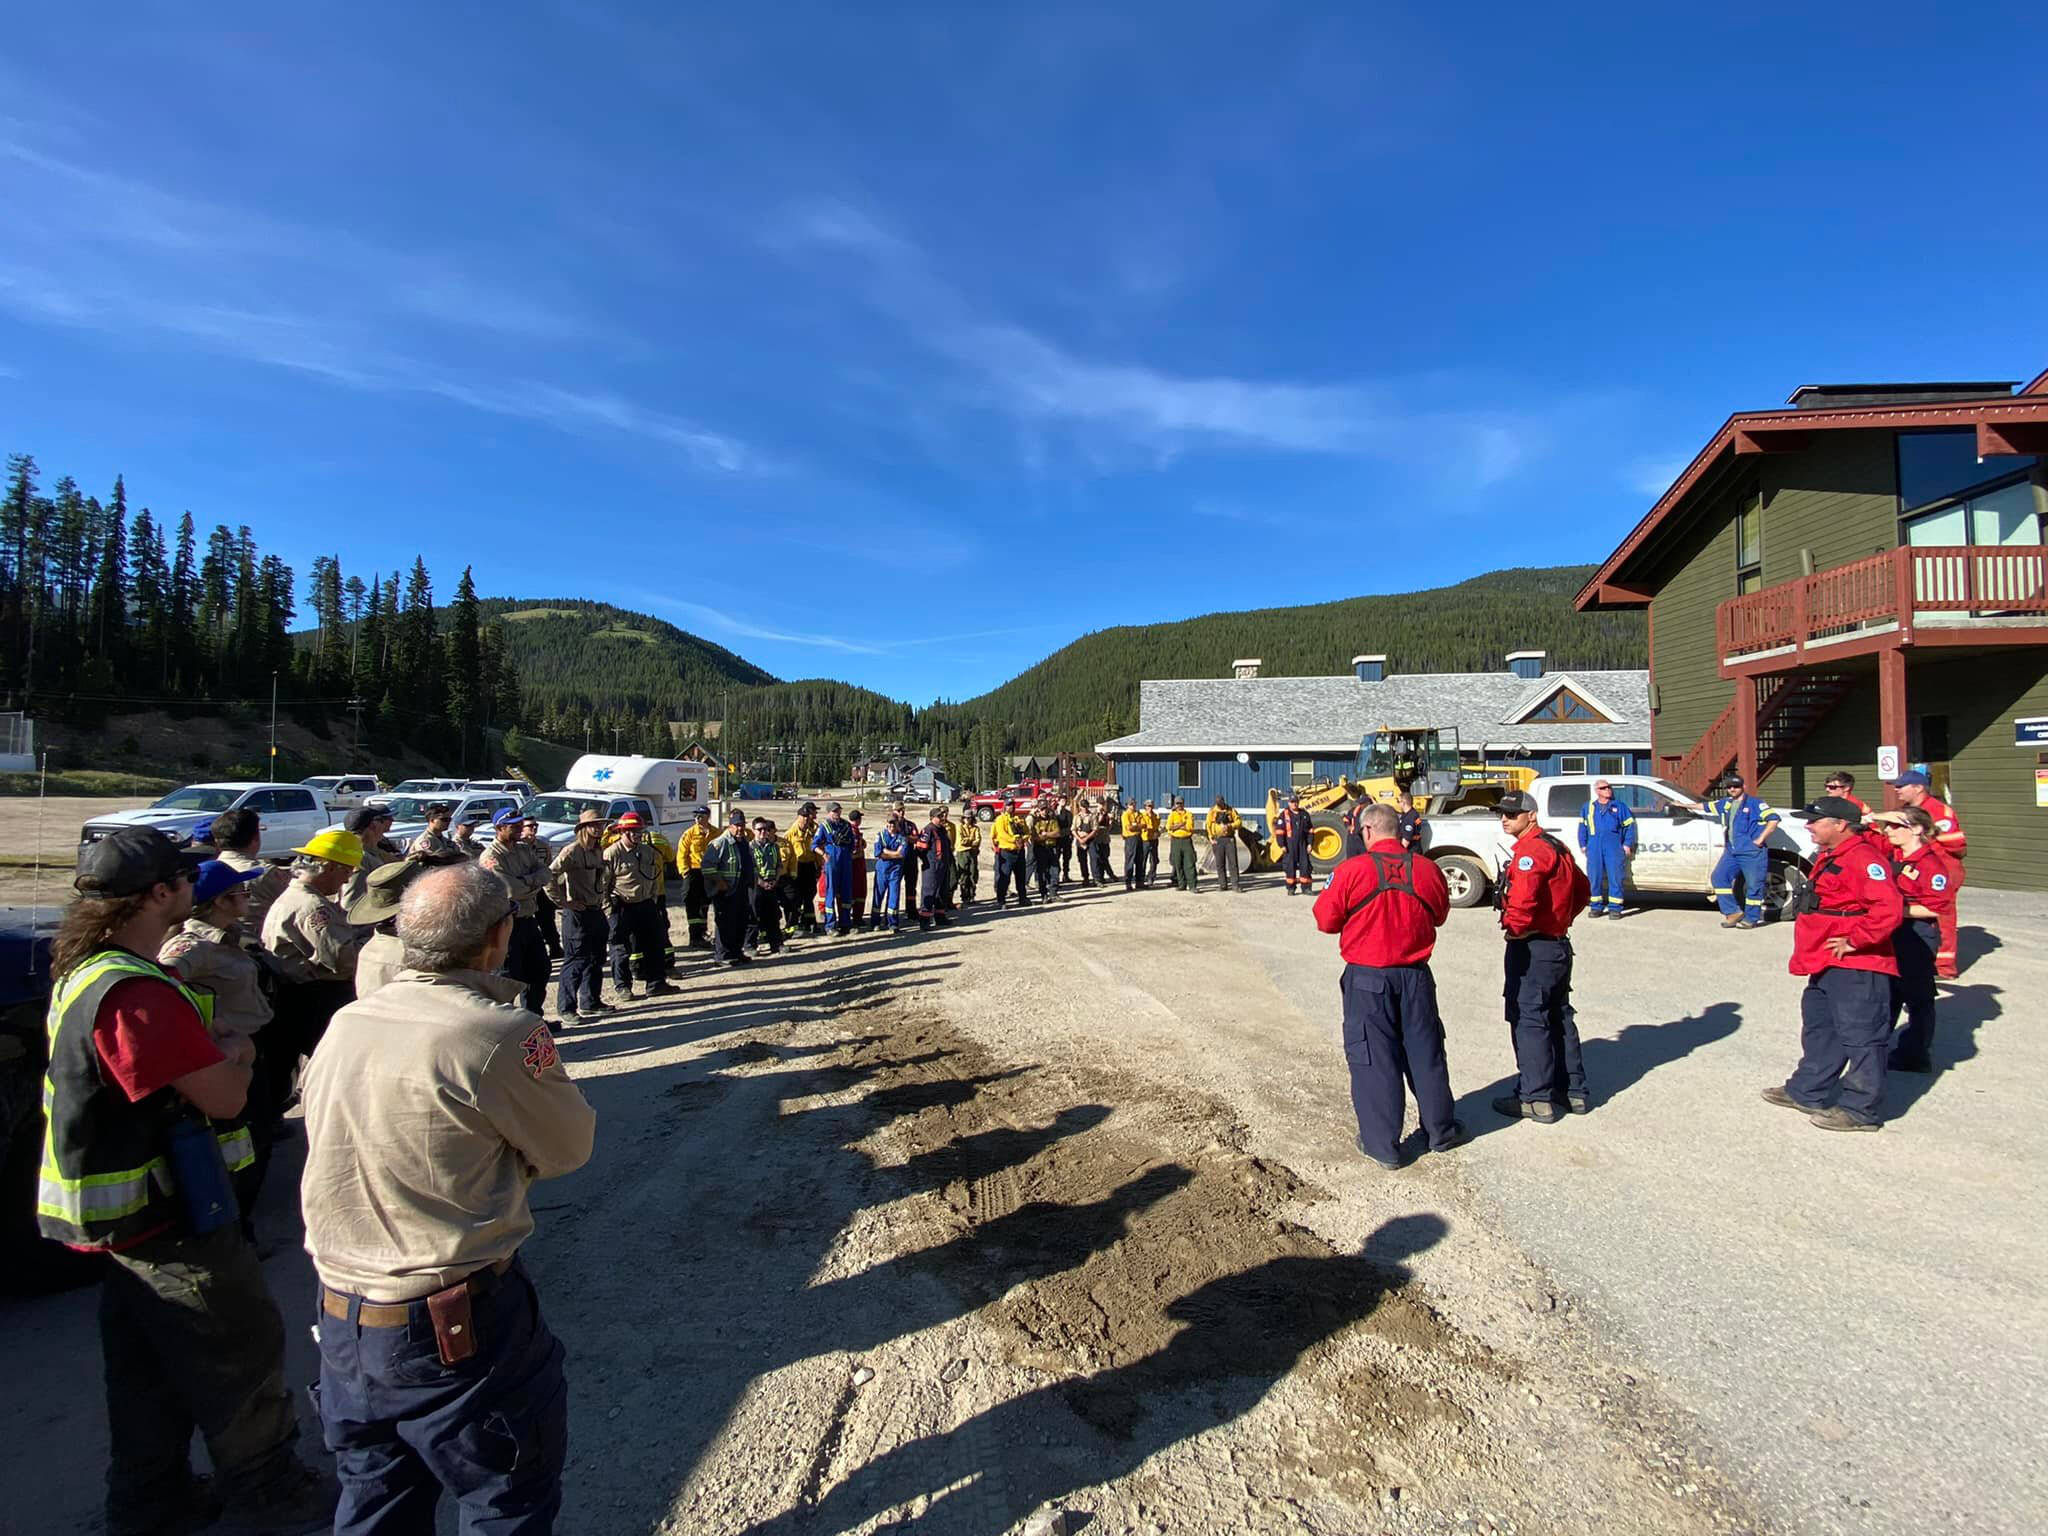 Apex Fire Brigade worked alongside BC Wildfire Services and many other B.C. fire departments to protect the evacuated properties at Apex Mountain Resort from the nearby Keremeos Creek Wildfire. Apex residents expressed their gratitude to all the firefighters who kept their homes intact. (Apex Fire Brigade)